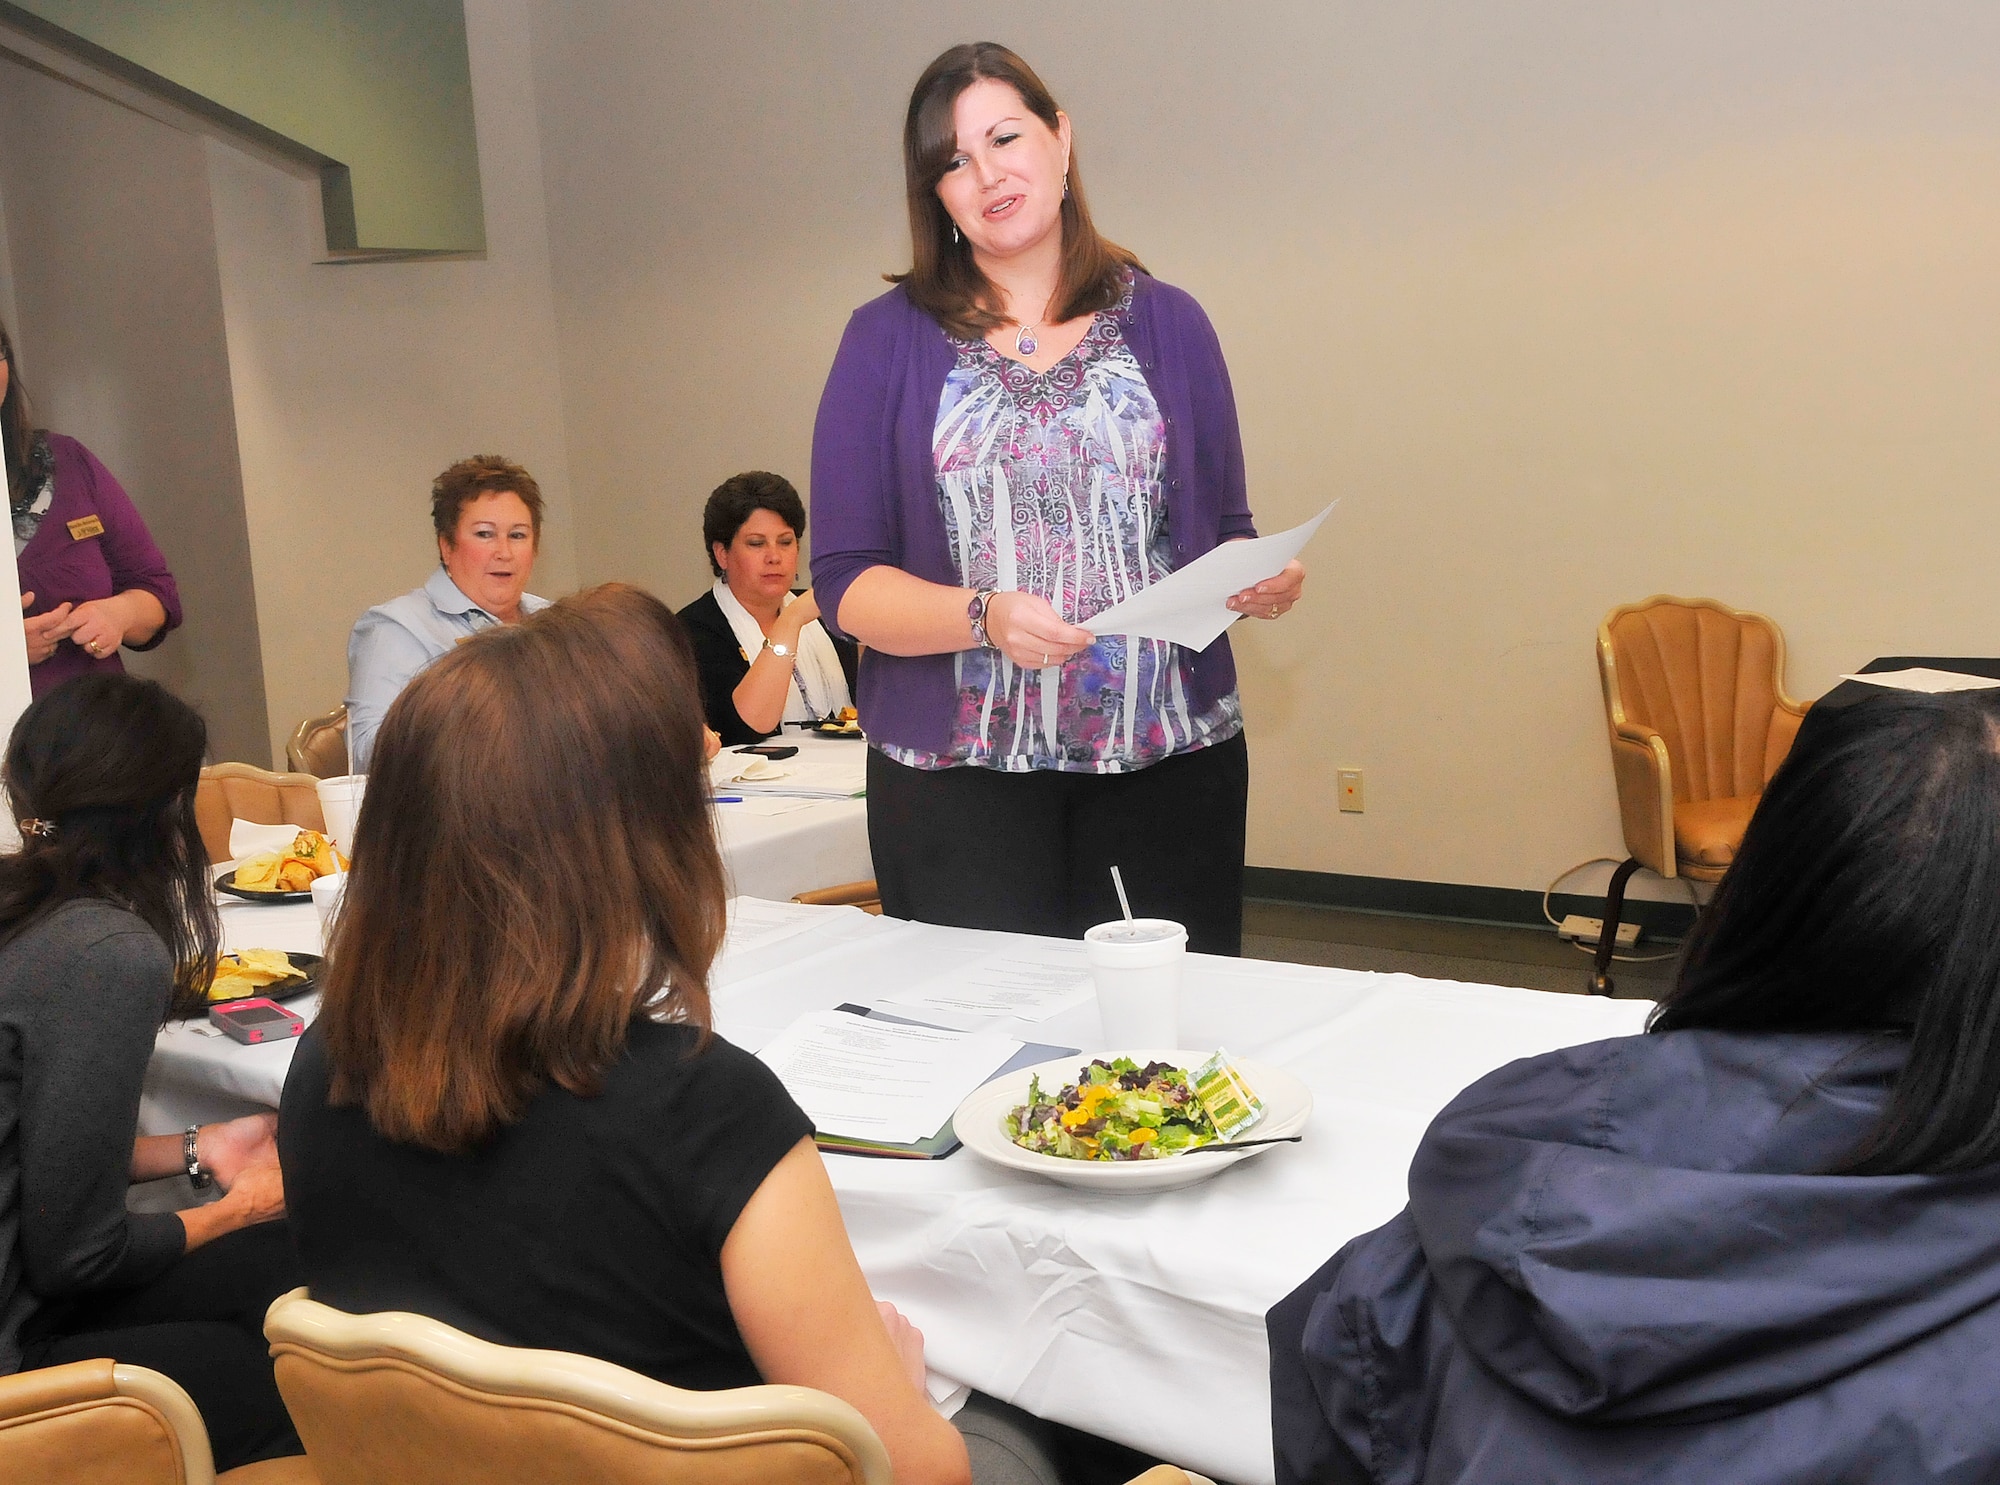 Lesley Darley, Community Support Coordinator, briefs members of the Parents Advocates for Students and Schools about the new CSC position during a working lunch Wednesday.  (U. S. Air Force photo/Sue Sapp)